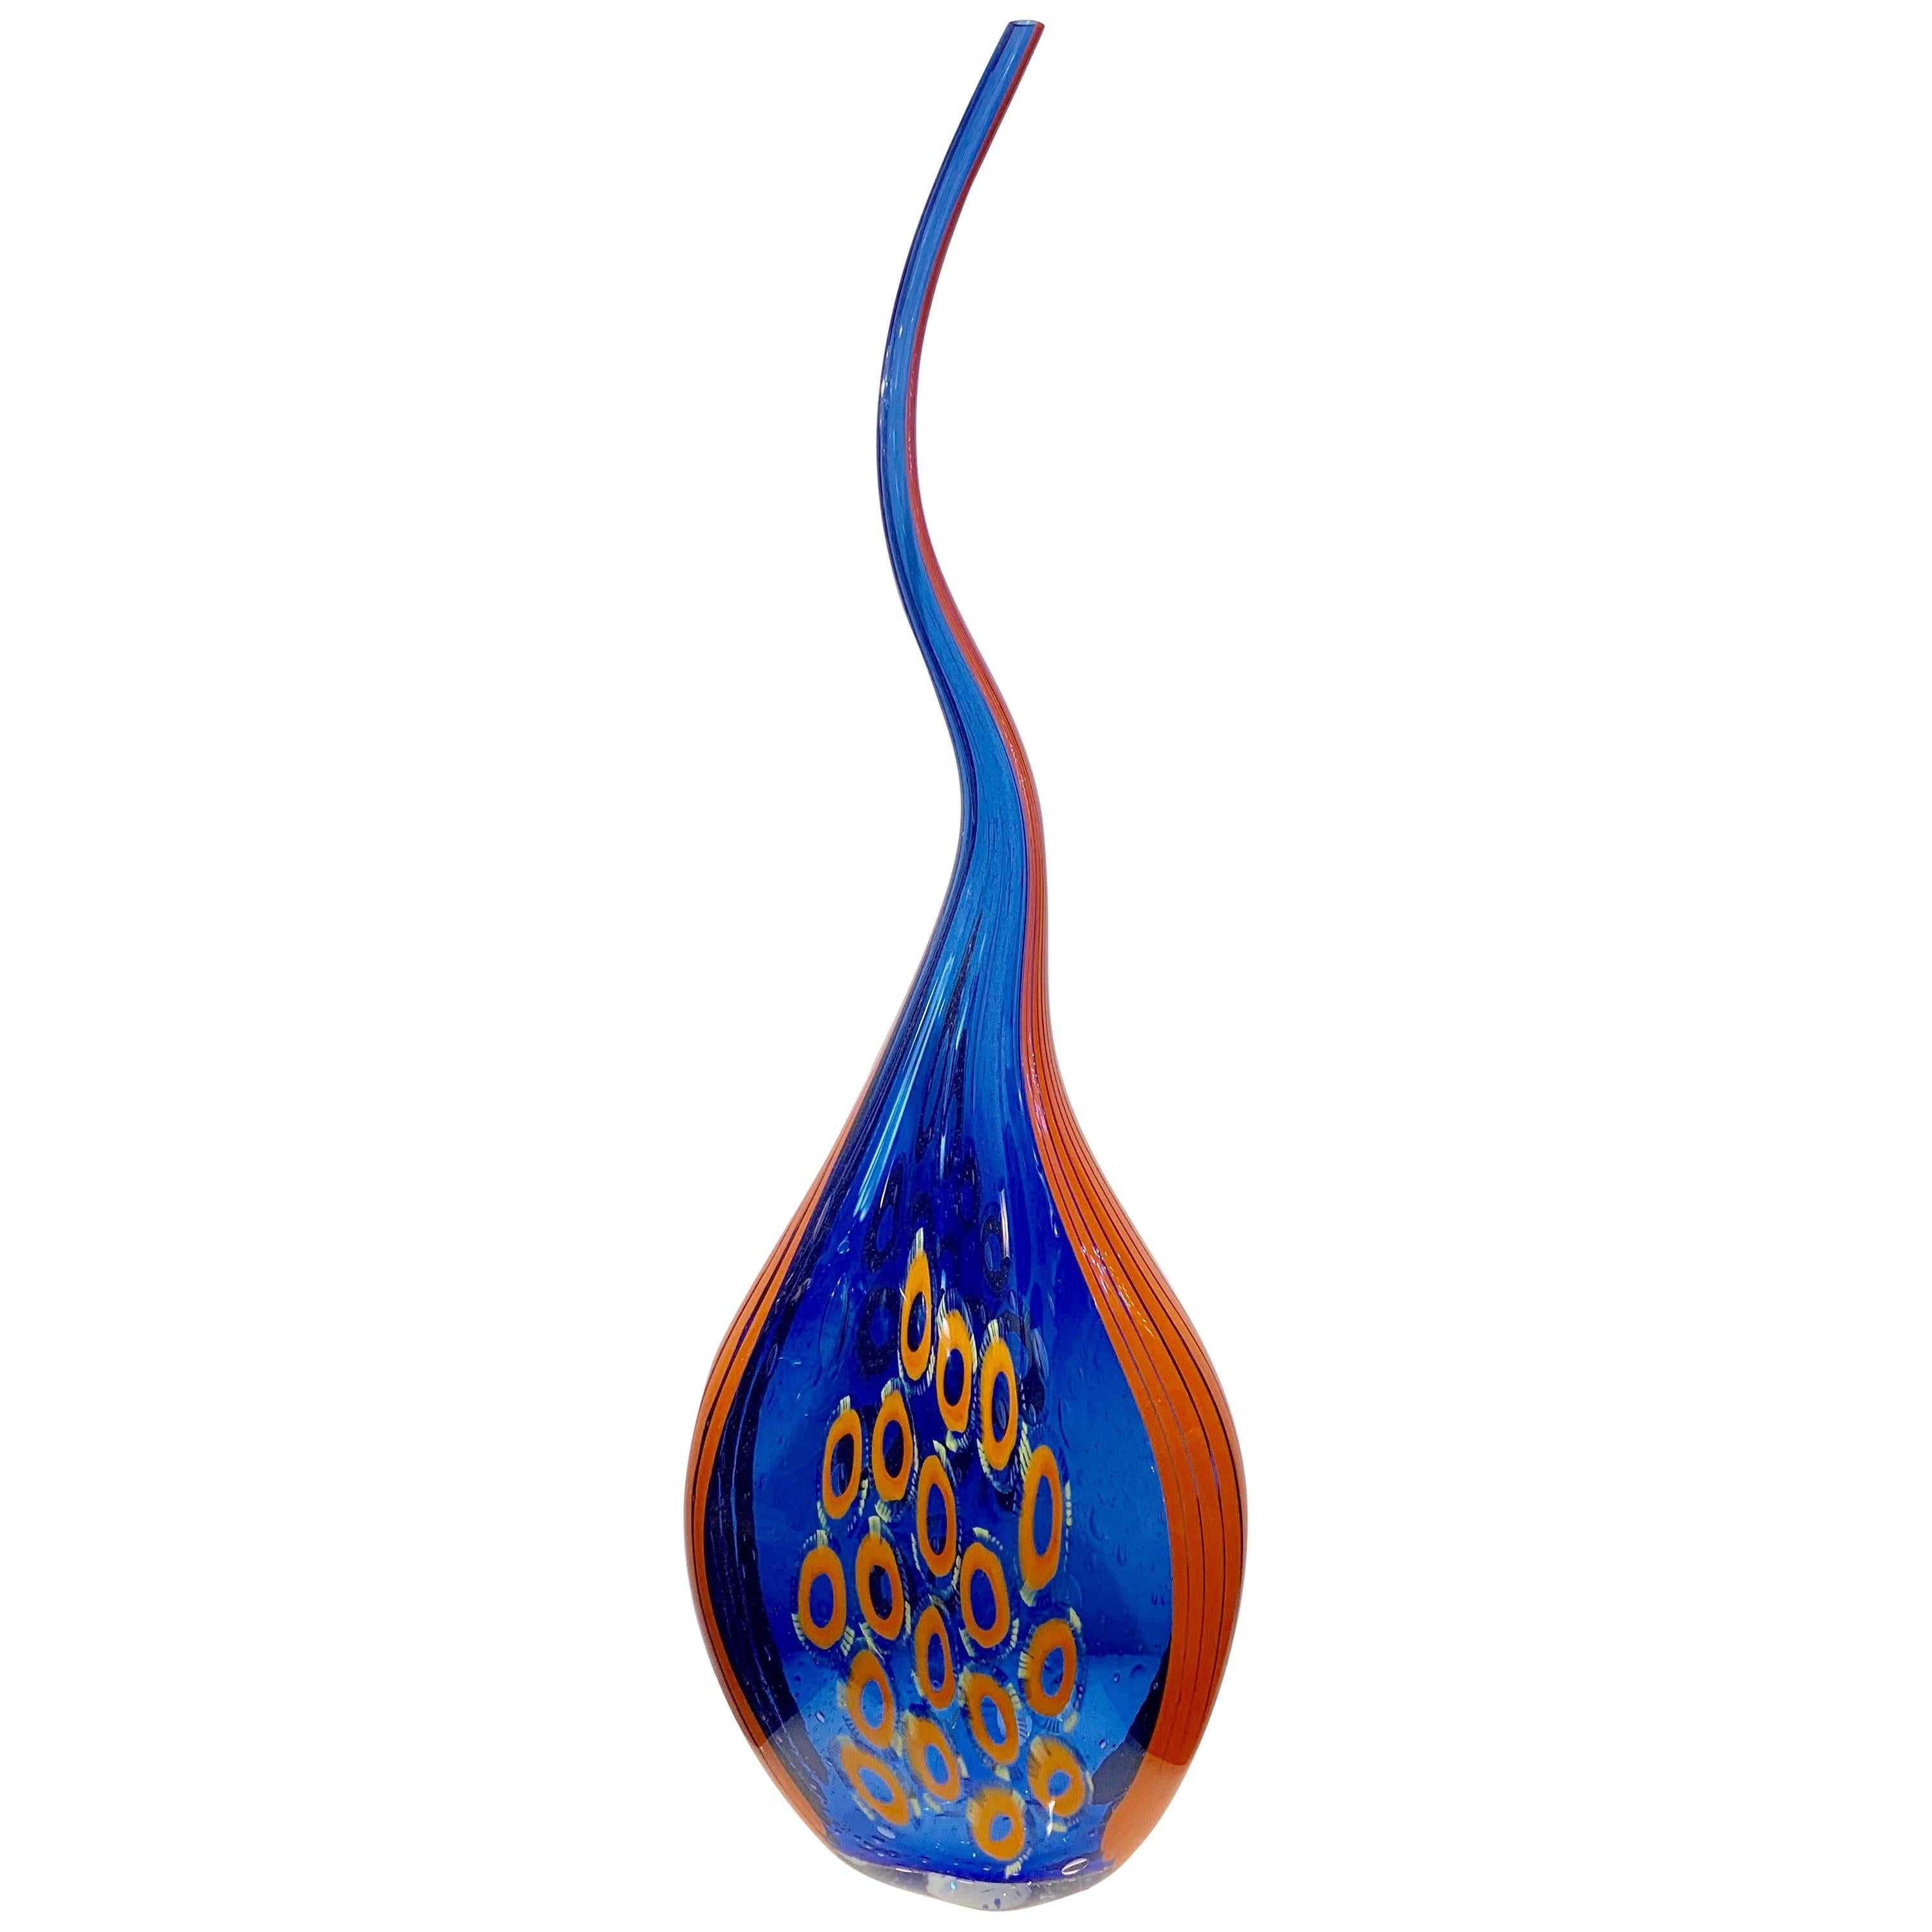 Donà Modern Art Glass Blue and Orange Sculpture Vase with Red and Yellow Murrine